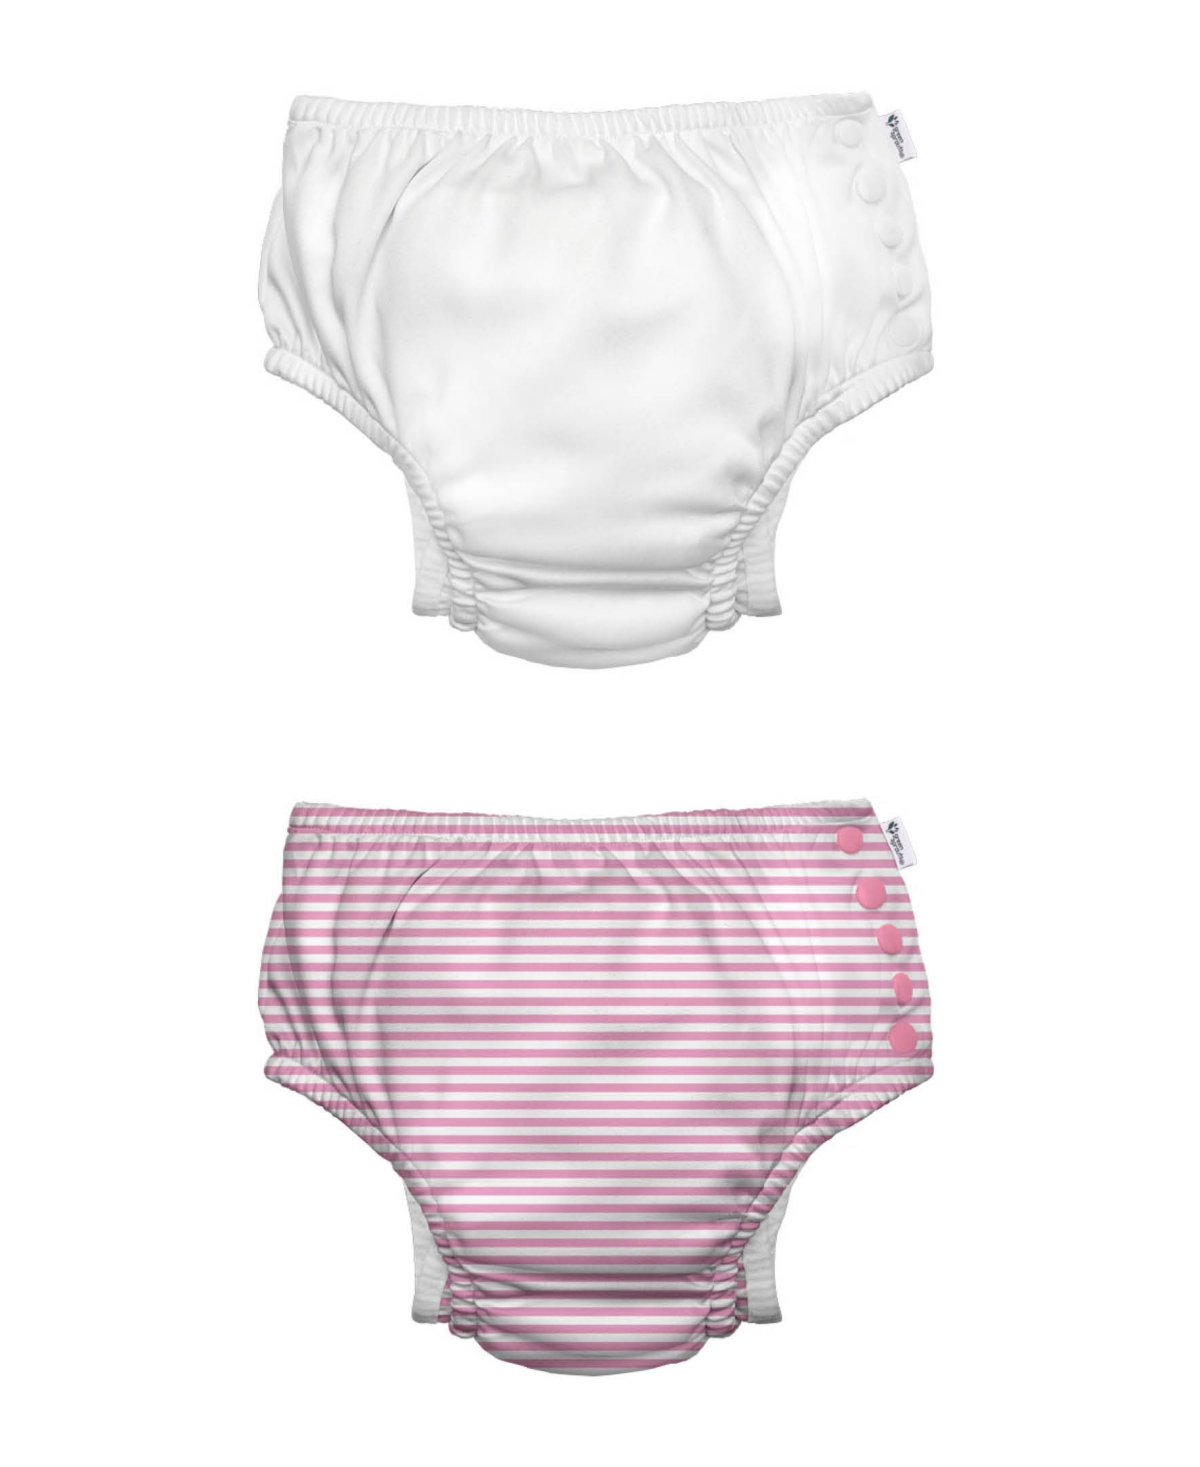 Green Sprouts Toddler Boys Or Toddler Girls Snap Swim Diaper, Pack Of 2 In Light Pink Pinstripe